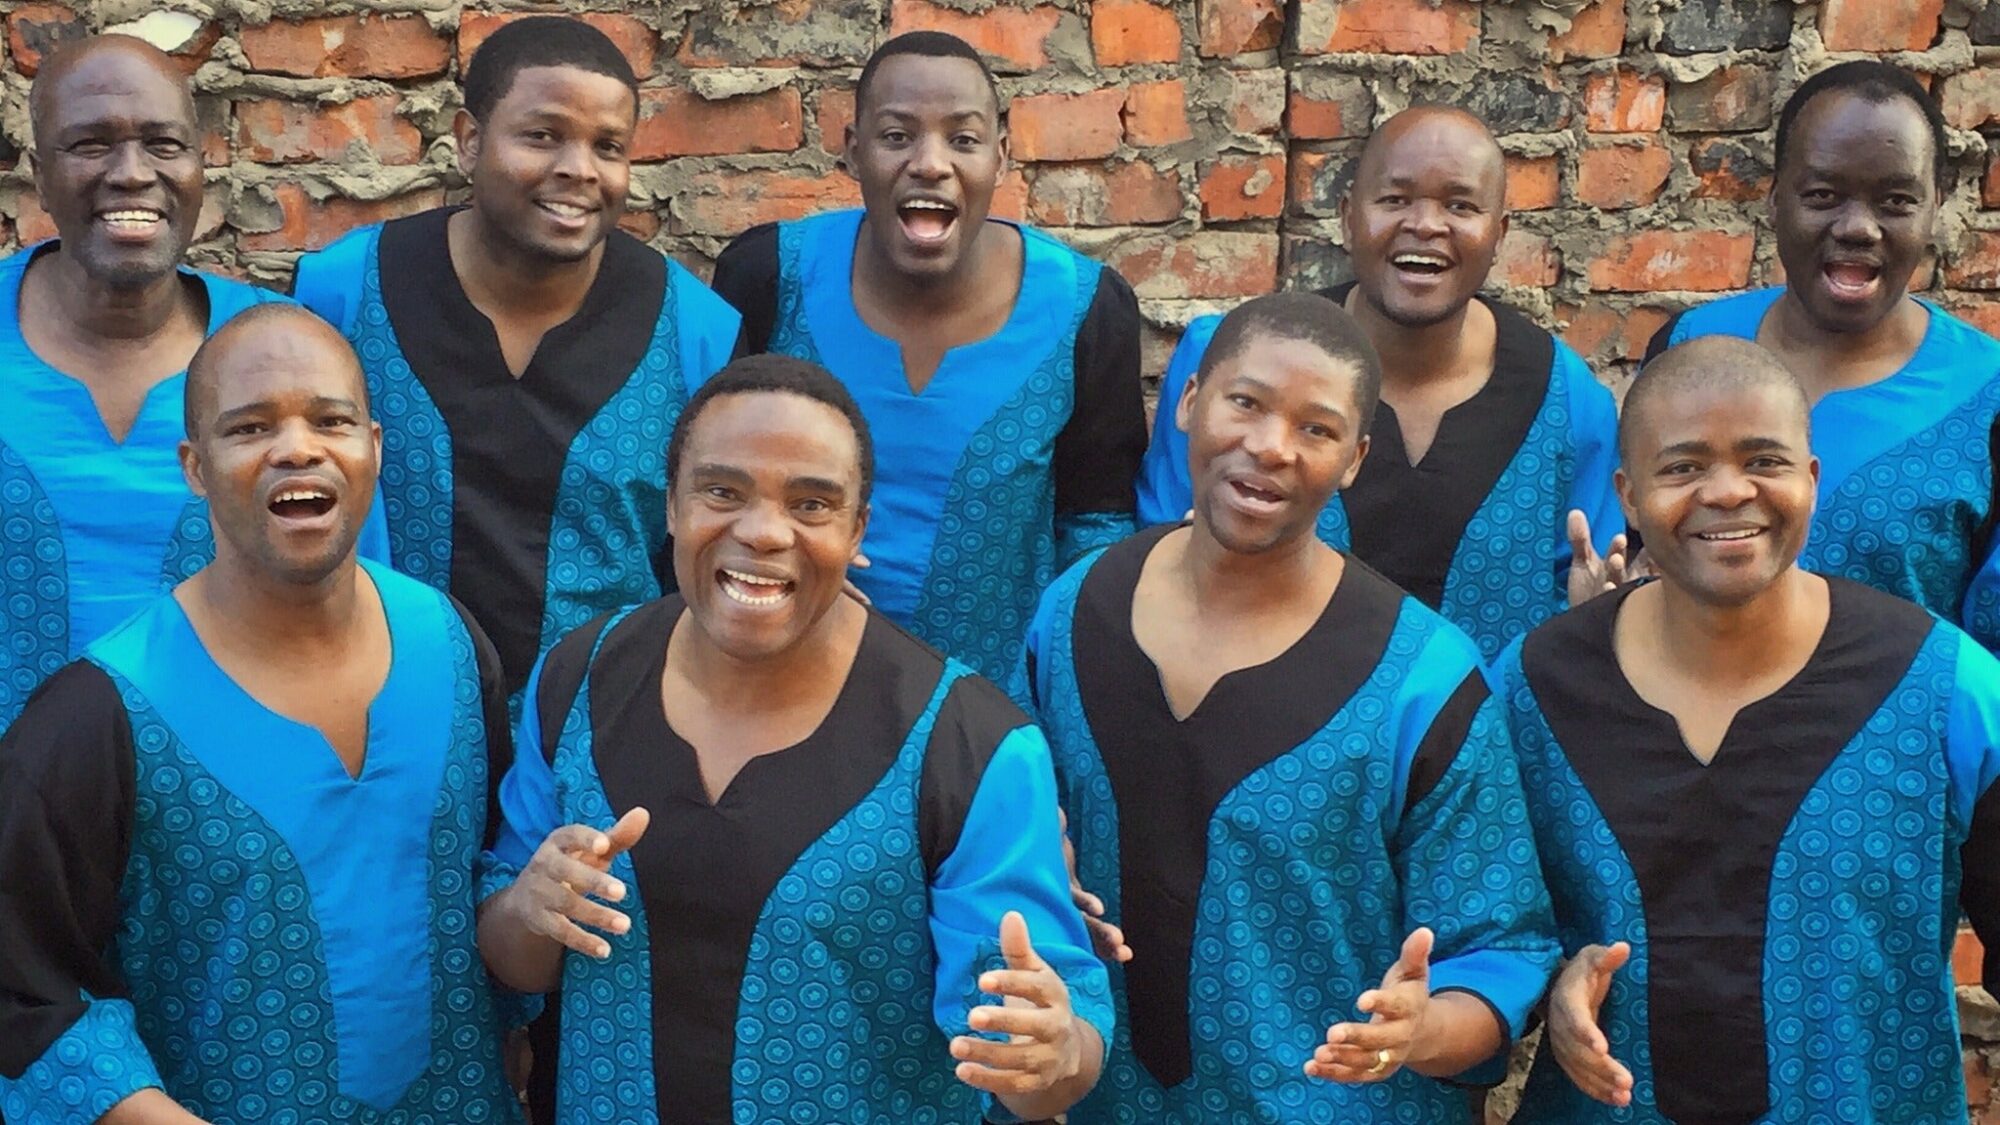 Image name Ladysmith Black Mambazo at Grand Opera House York York the 1 image from the post Events in Yorkshire.com.